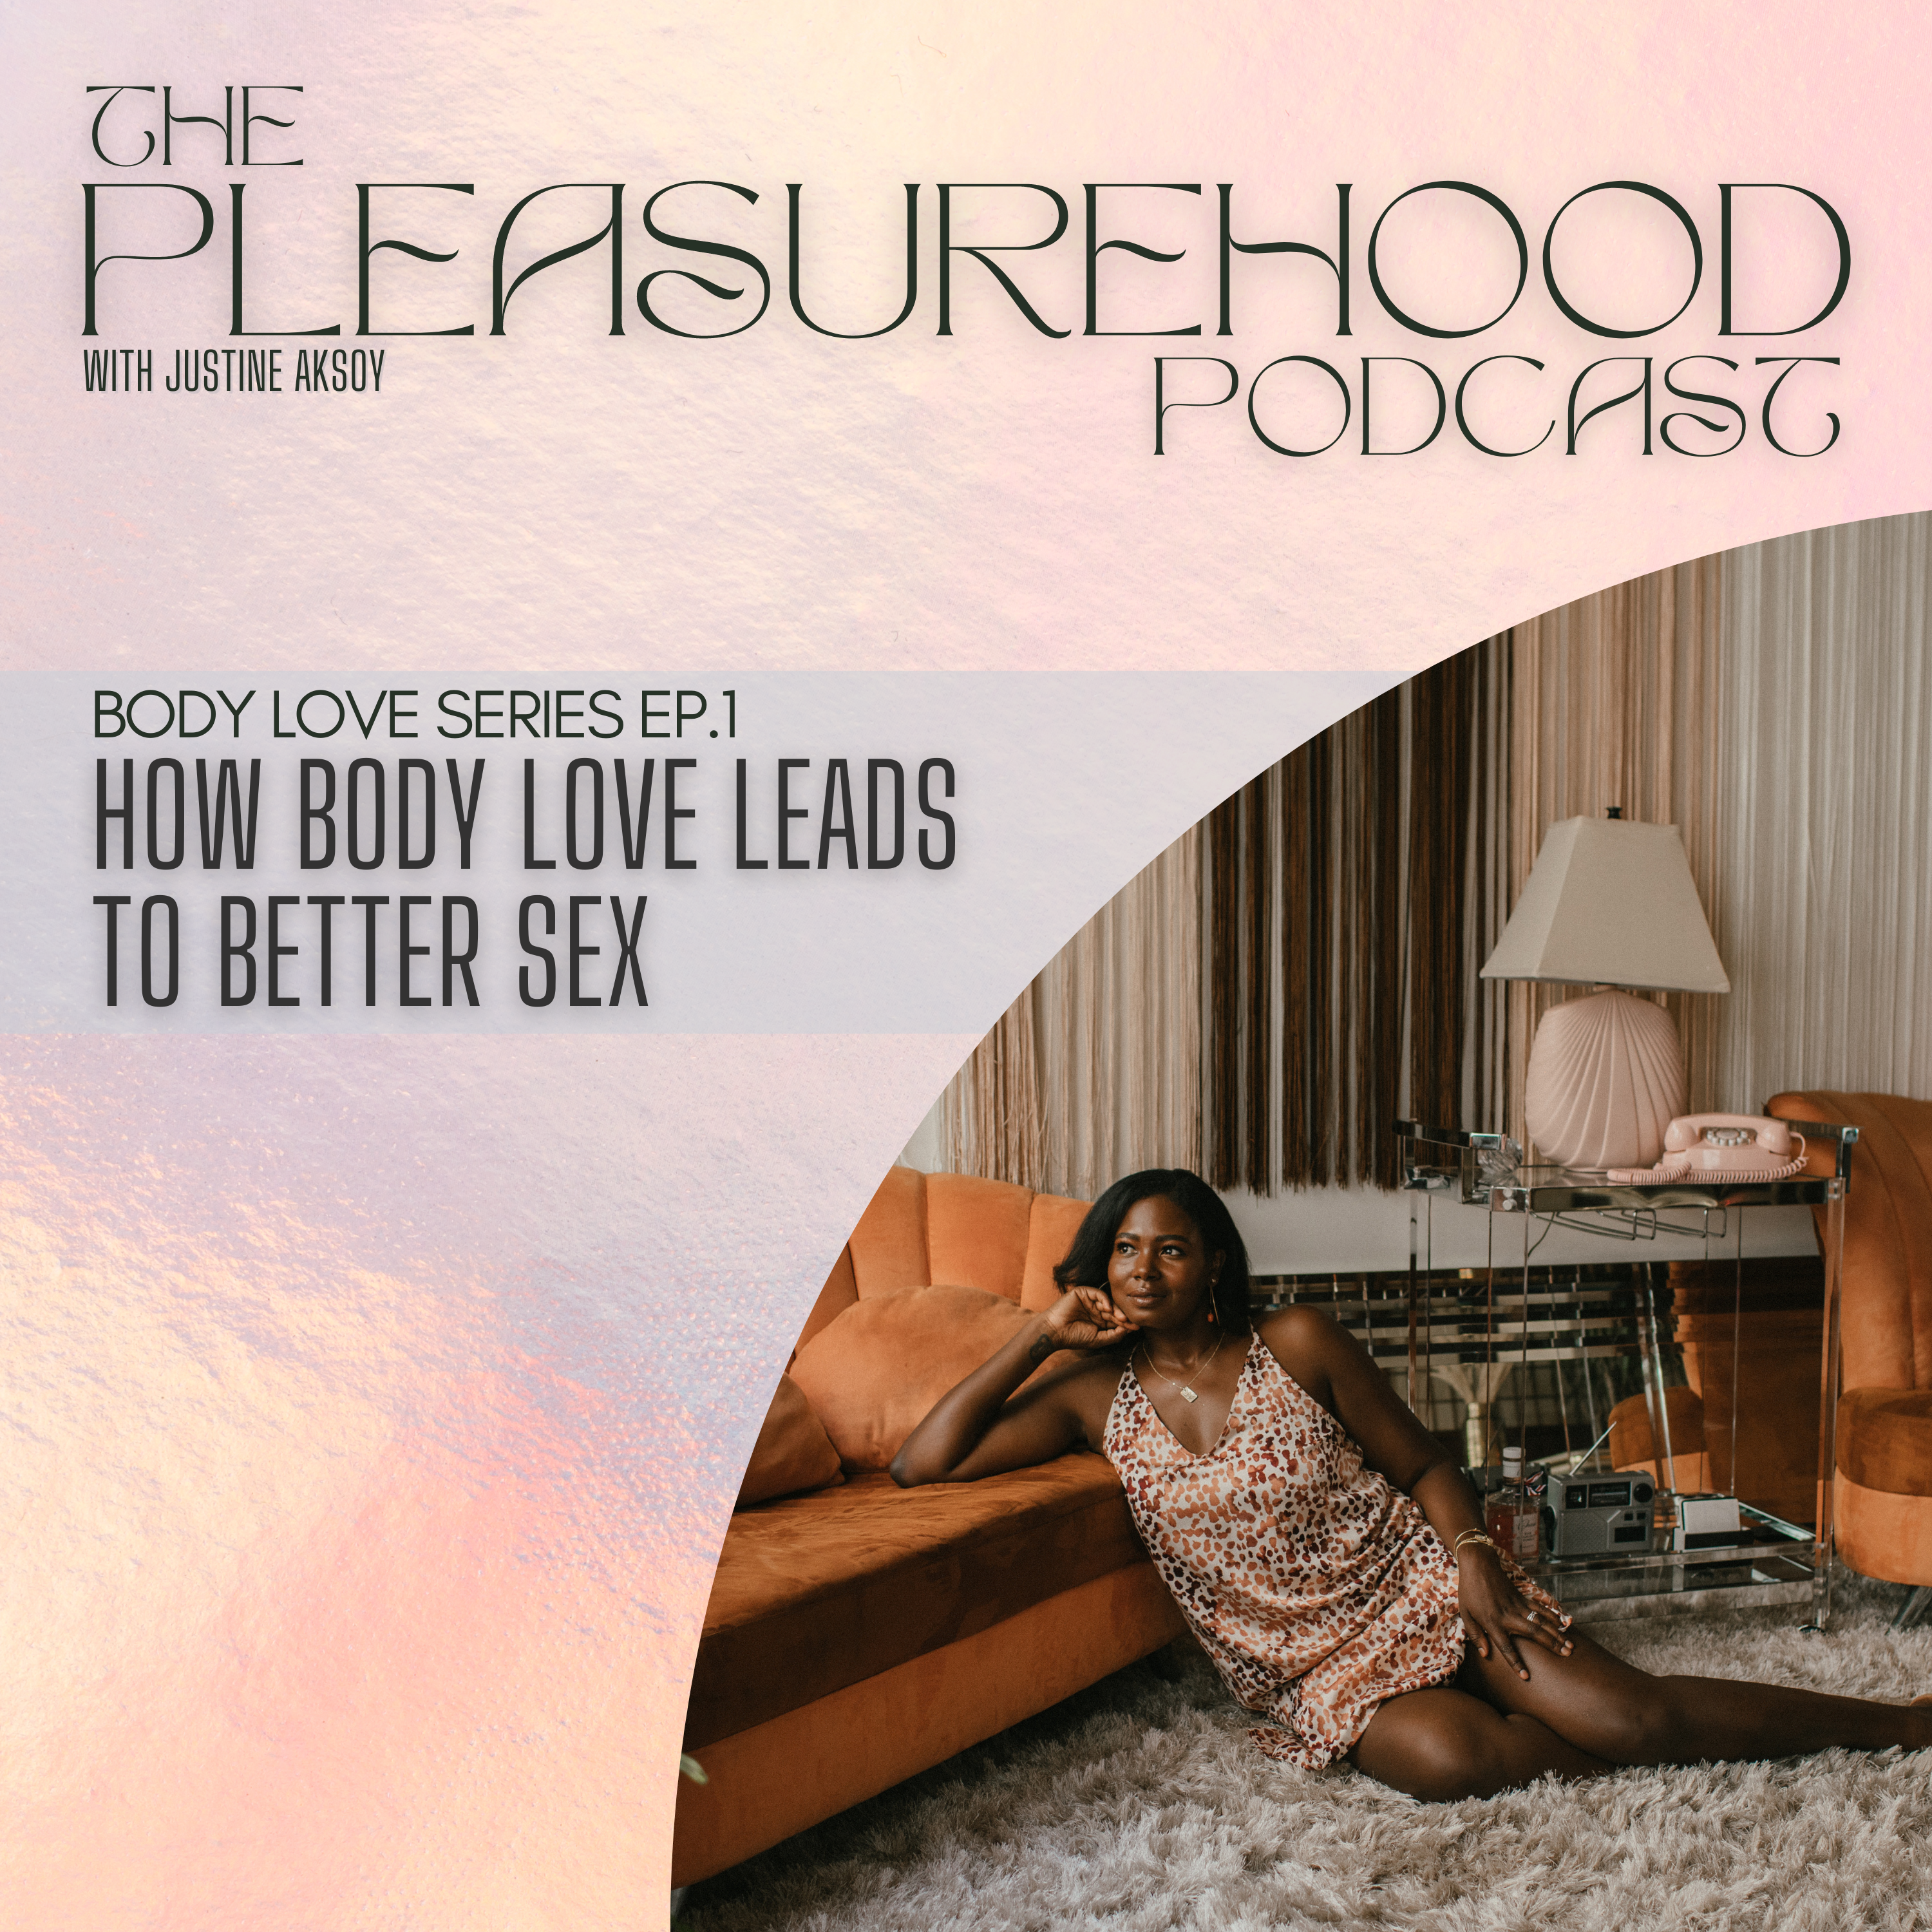 Body Love Series Episode 1: How Body Love Leads to Better Sex